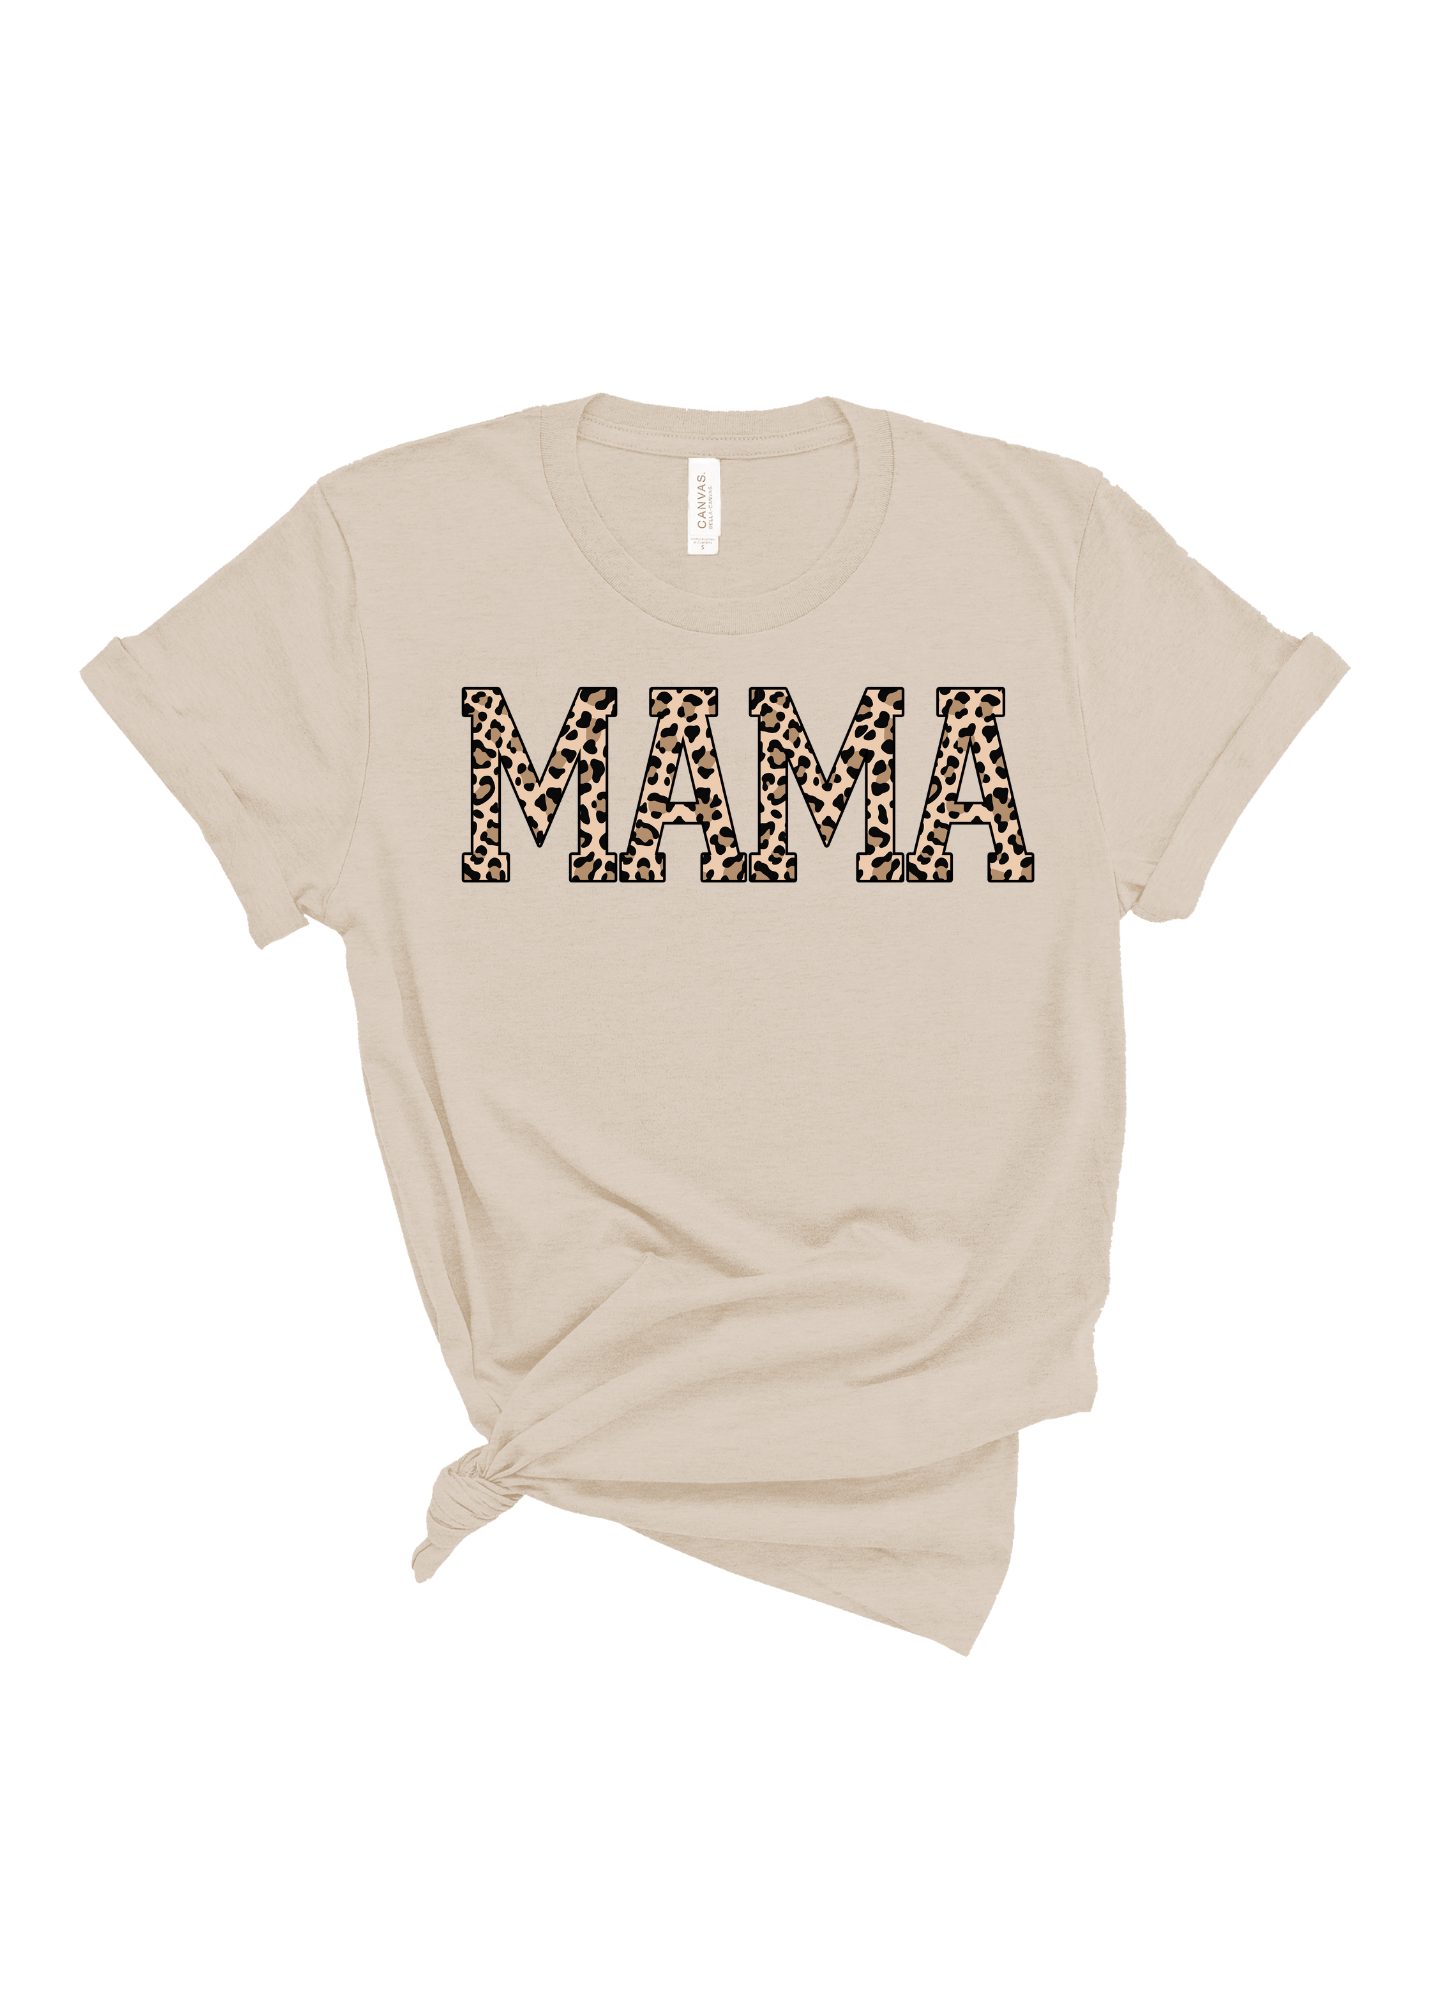 Mama Leopard | Tee | Adult-Sister Shirts-Sister Shirts, Cute & Custom Tees for Mama & Littles in Trussville, Alabama.